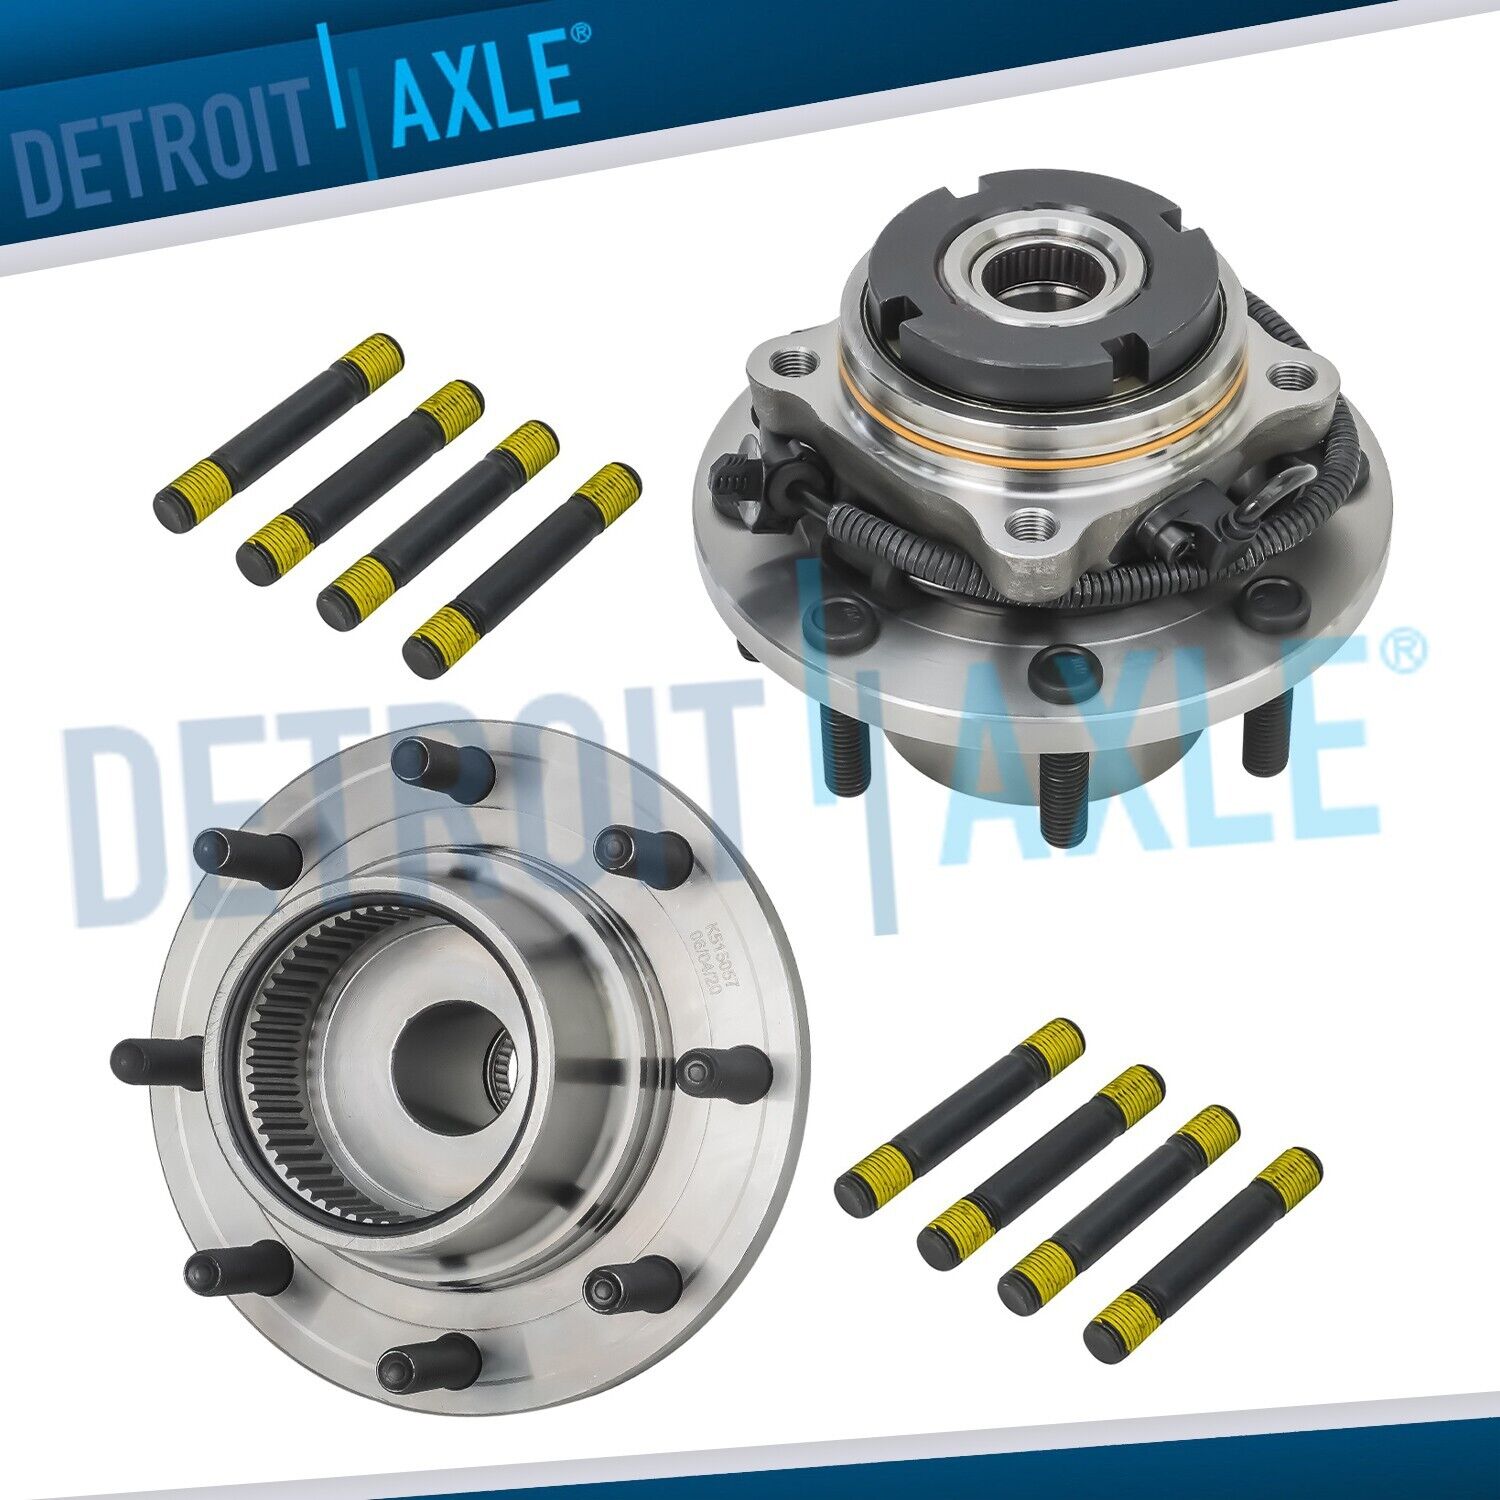 4WD Front Wheel Bearing Hubs for 1999-2004 Ford F-250 F-350 F-450 F-550 SD DRW